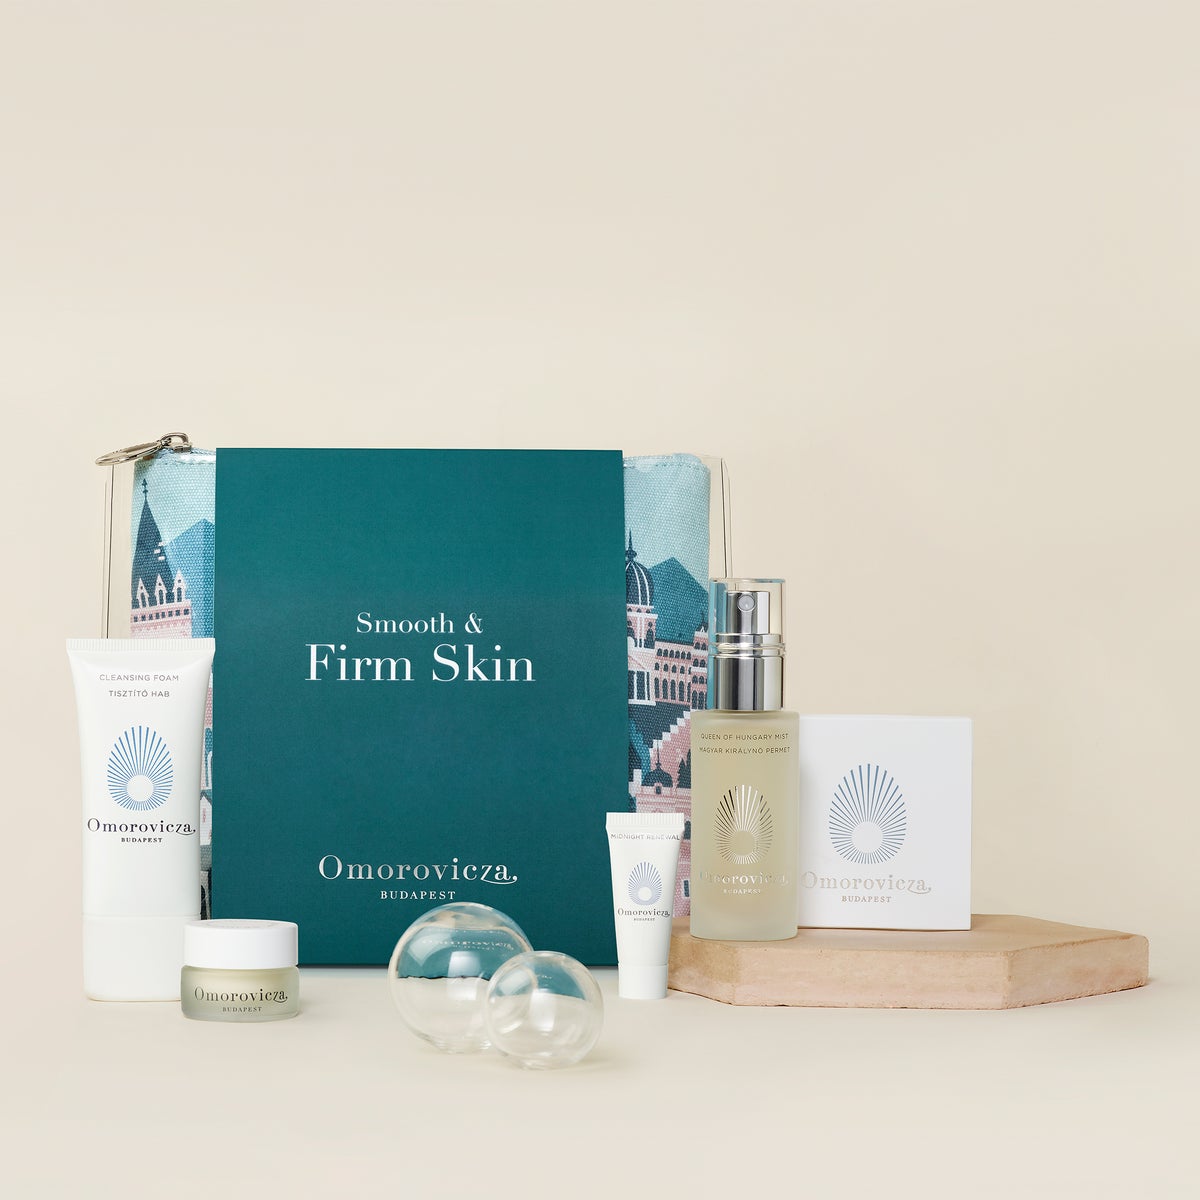 FIRM & SMOOTH TRIAL KIT